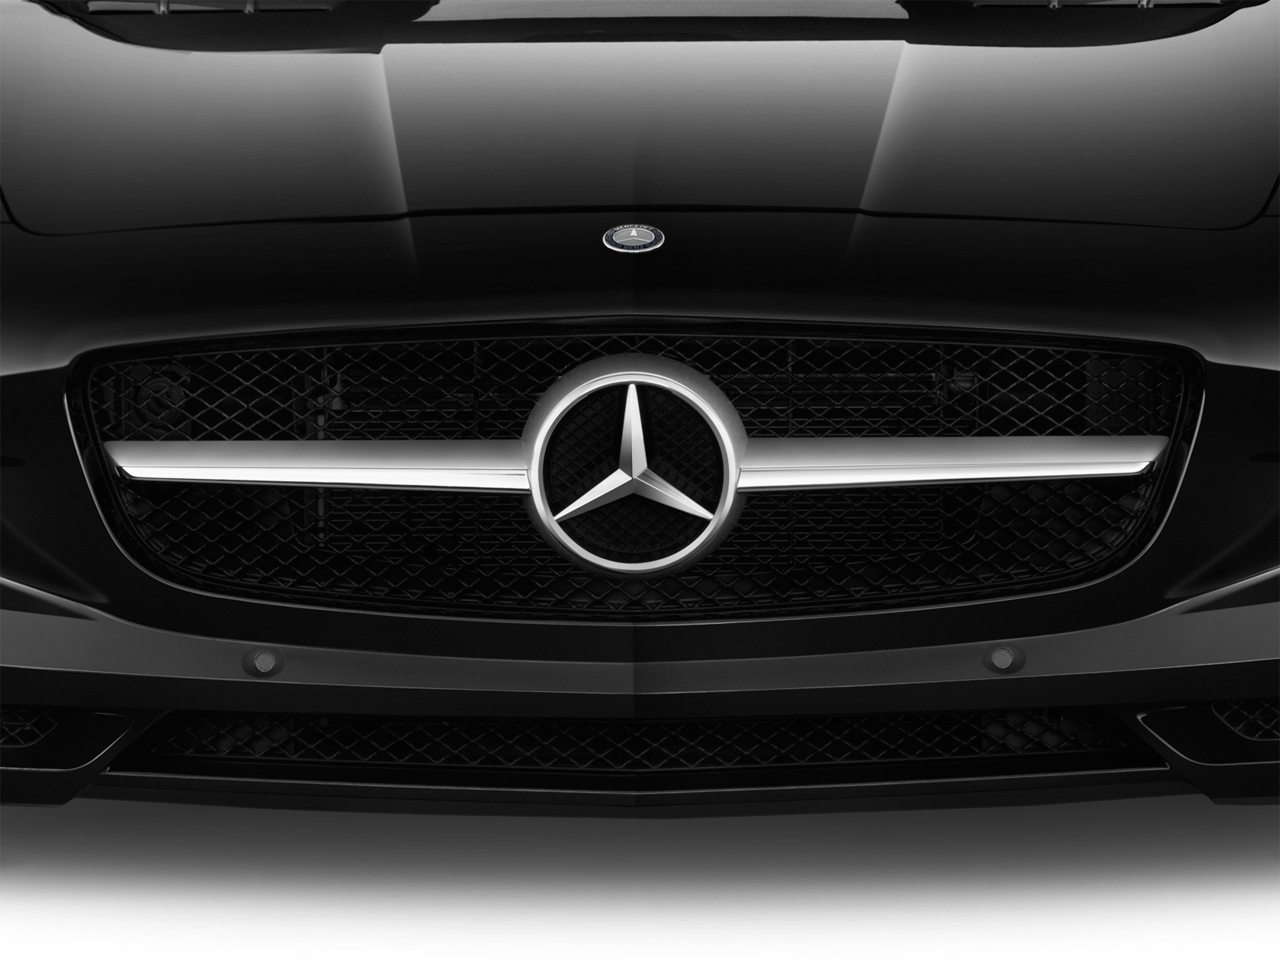 What are some Mercedes models?